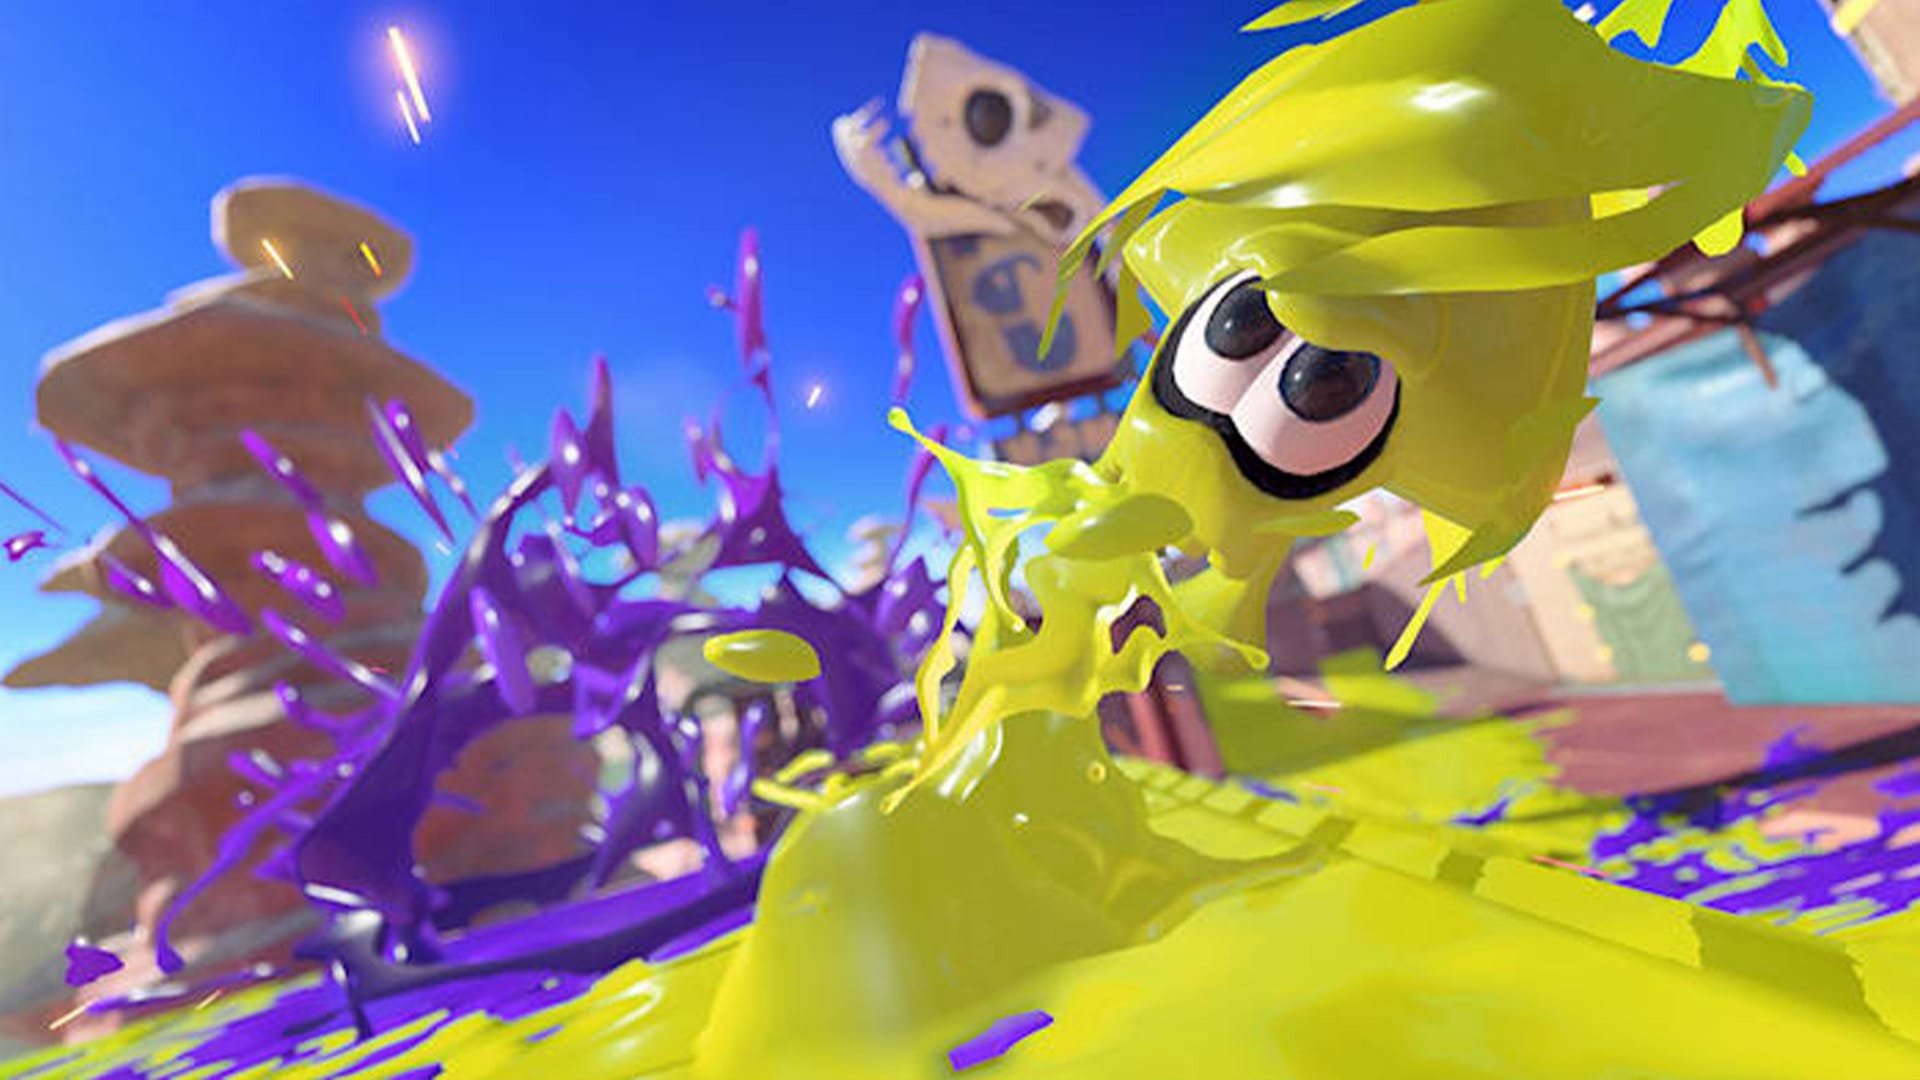 Catch up on what Splatoon 3 has to offer Screenshot 2